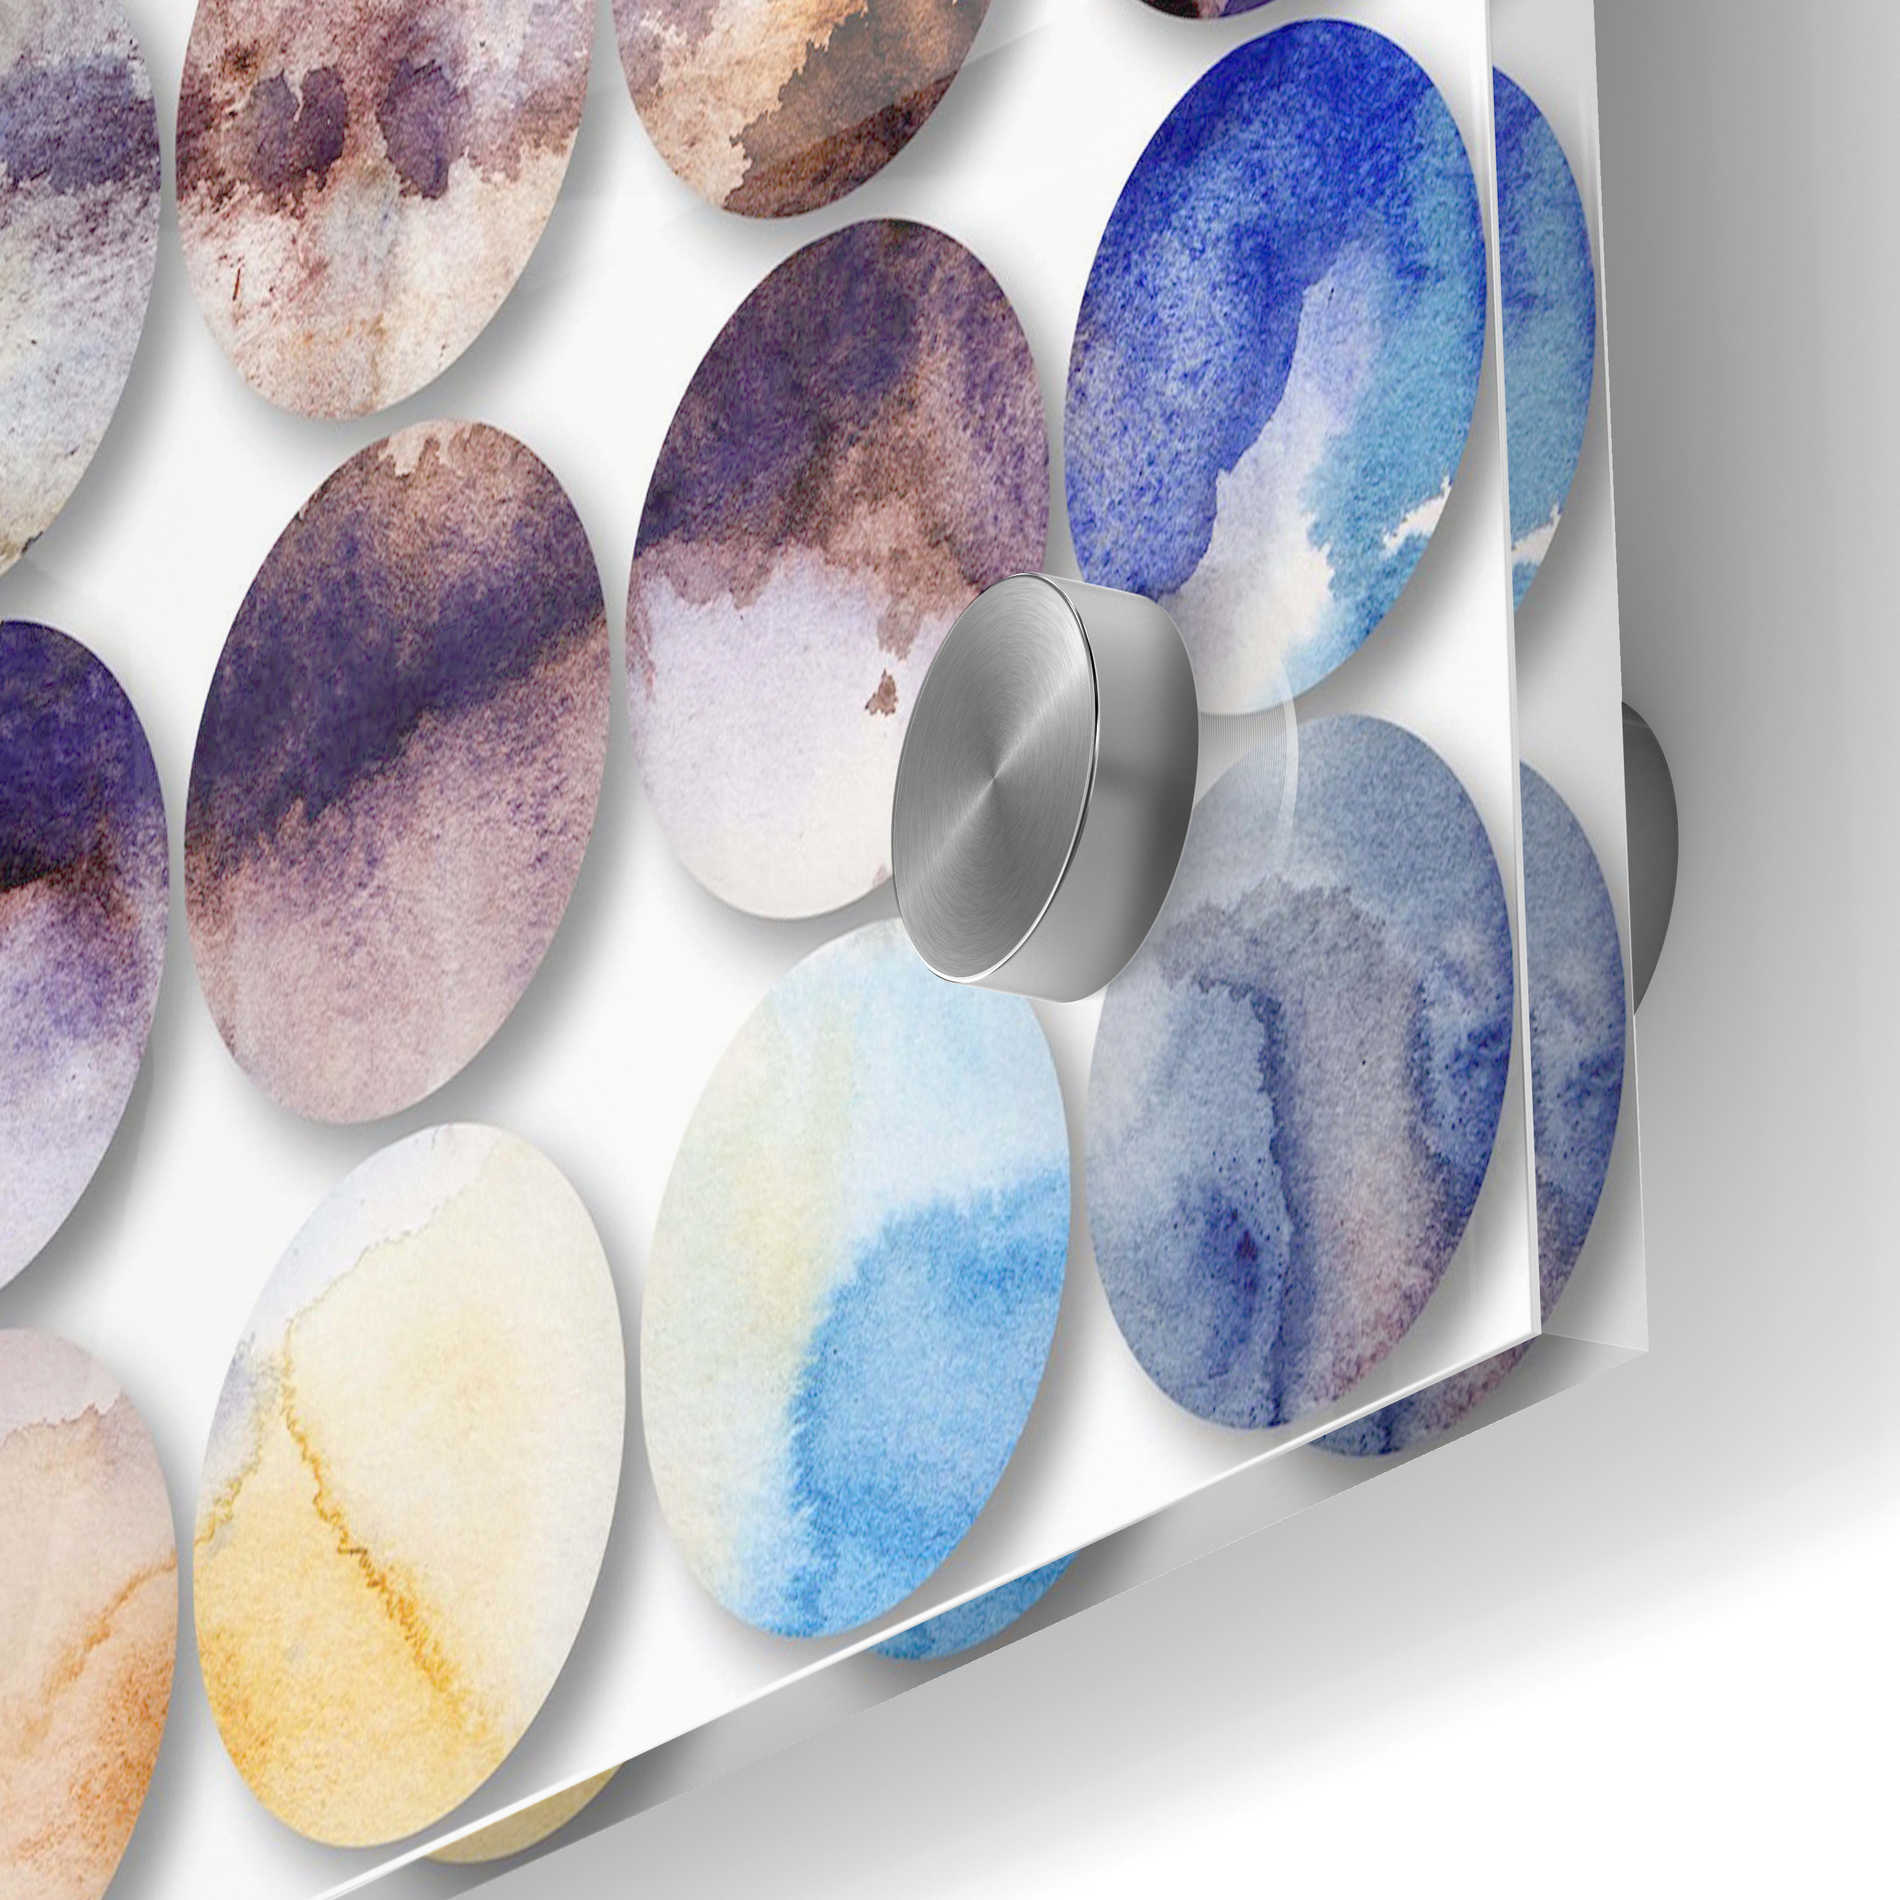 Epic Art 'Watercolor Colorful Circles 4' by Irena Orlov, Acrylic Glass Wall Art,24x36